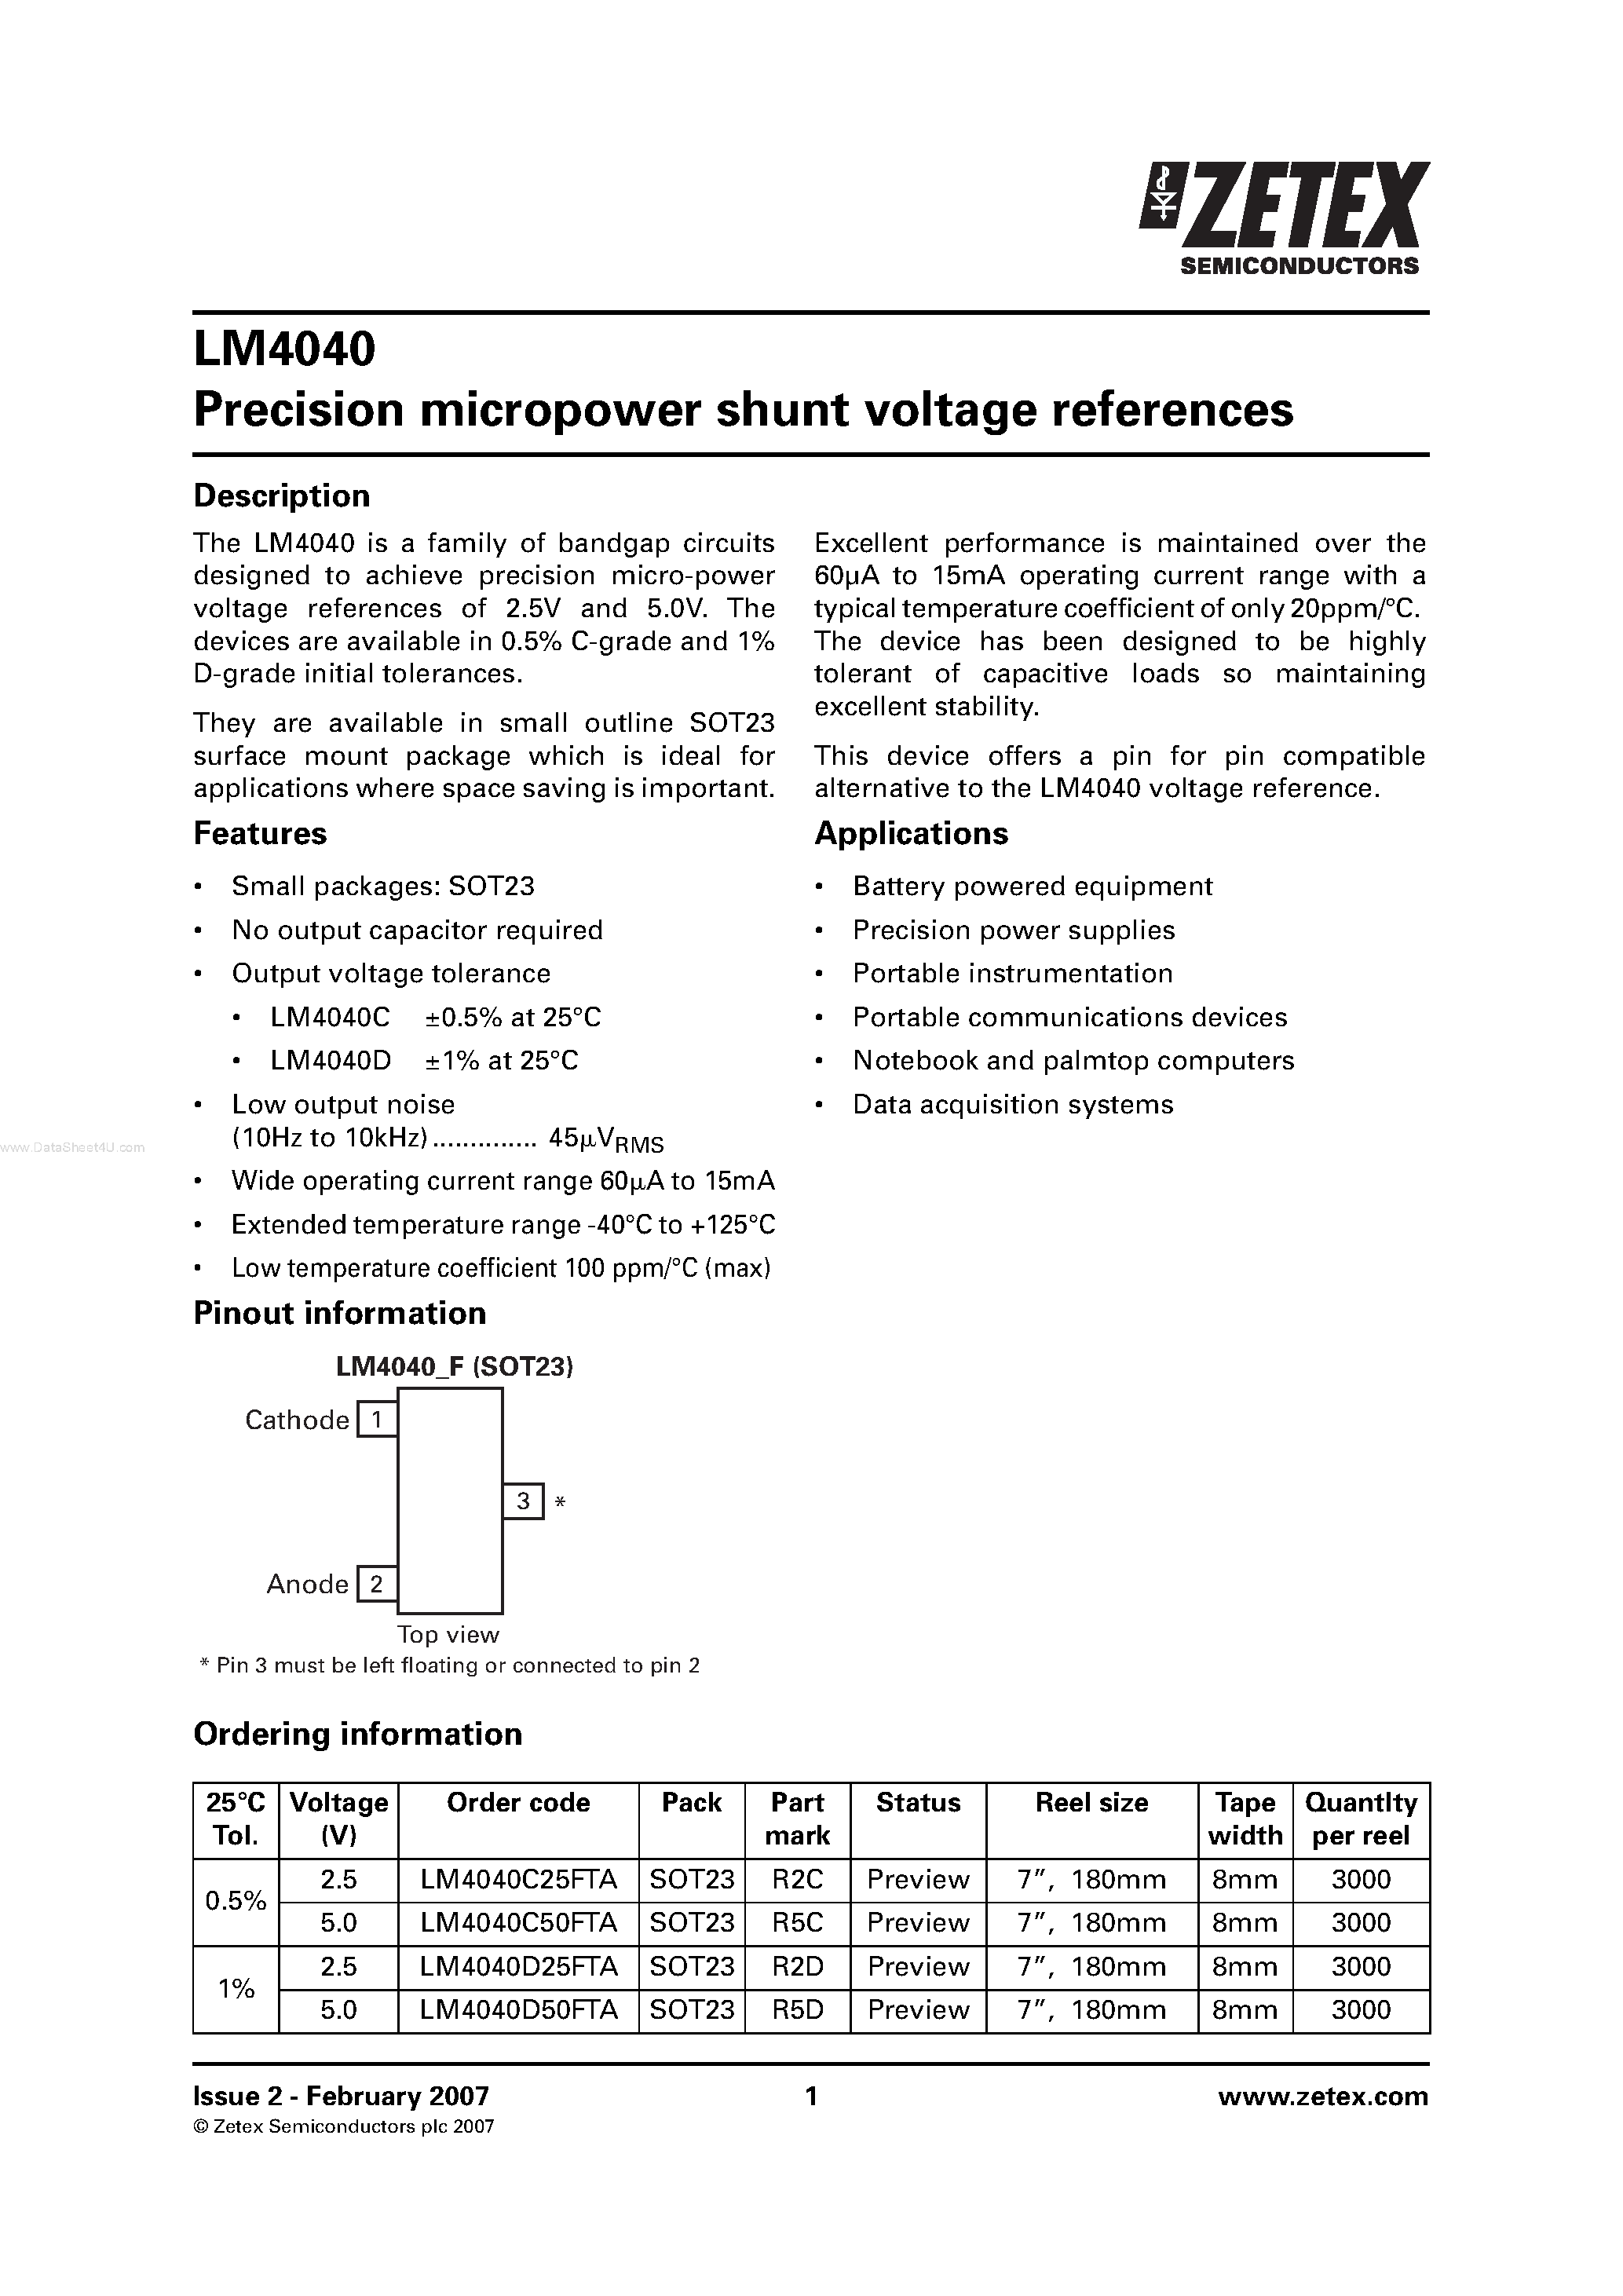 Datasheet LM4040 - Precision micropower shunt voltage references page 1